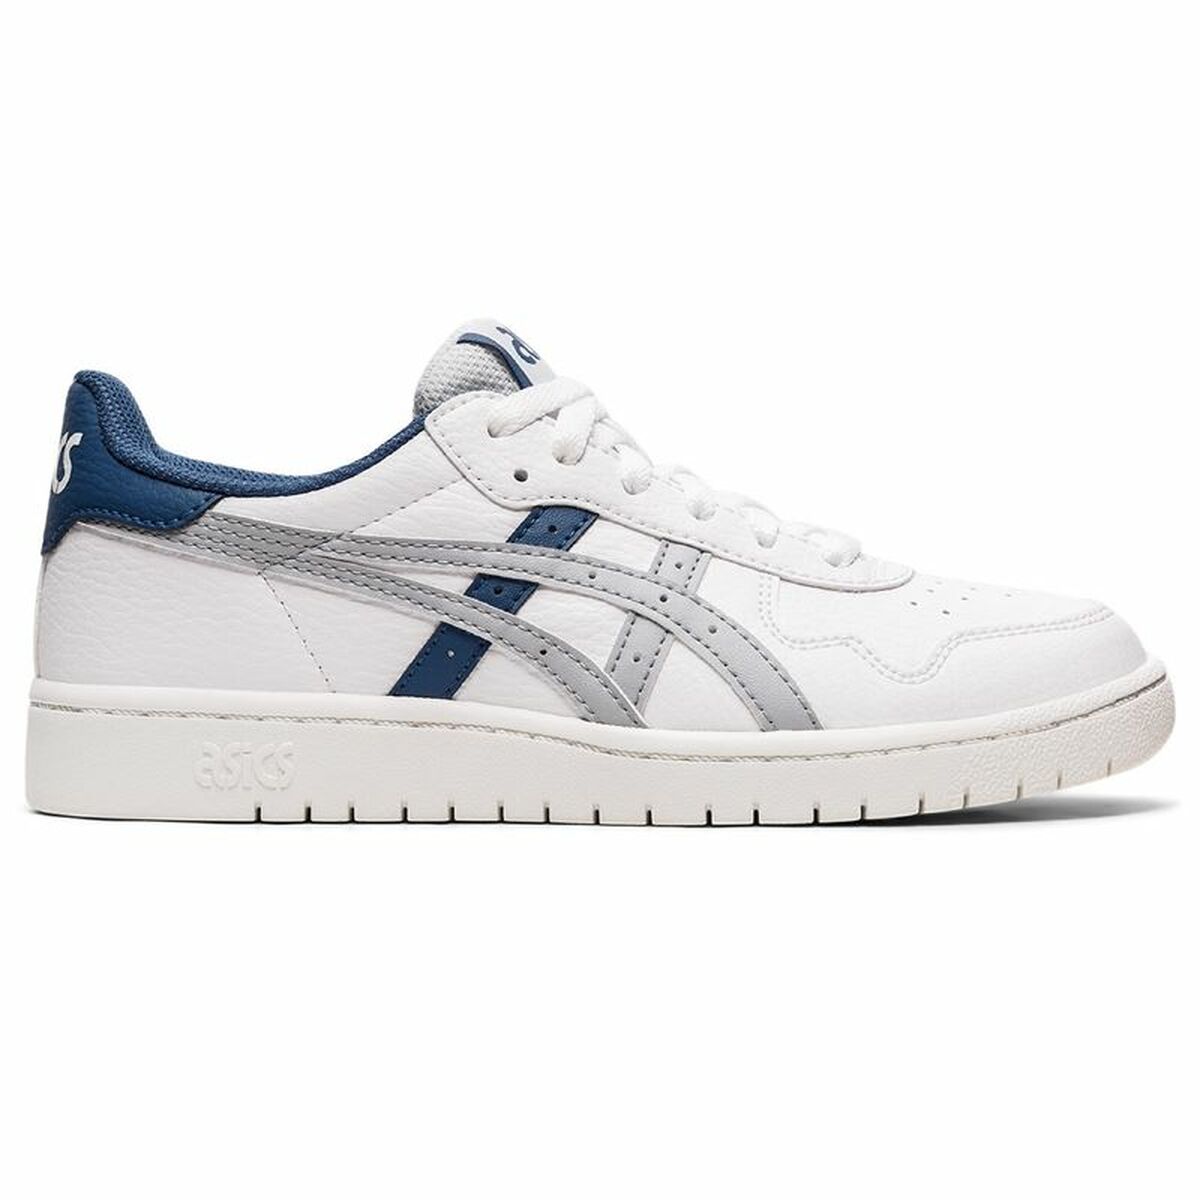 Sports Shoes for Kids Asics Japan S GS White